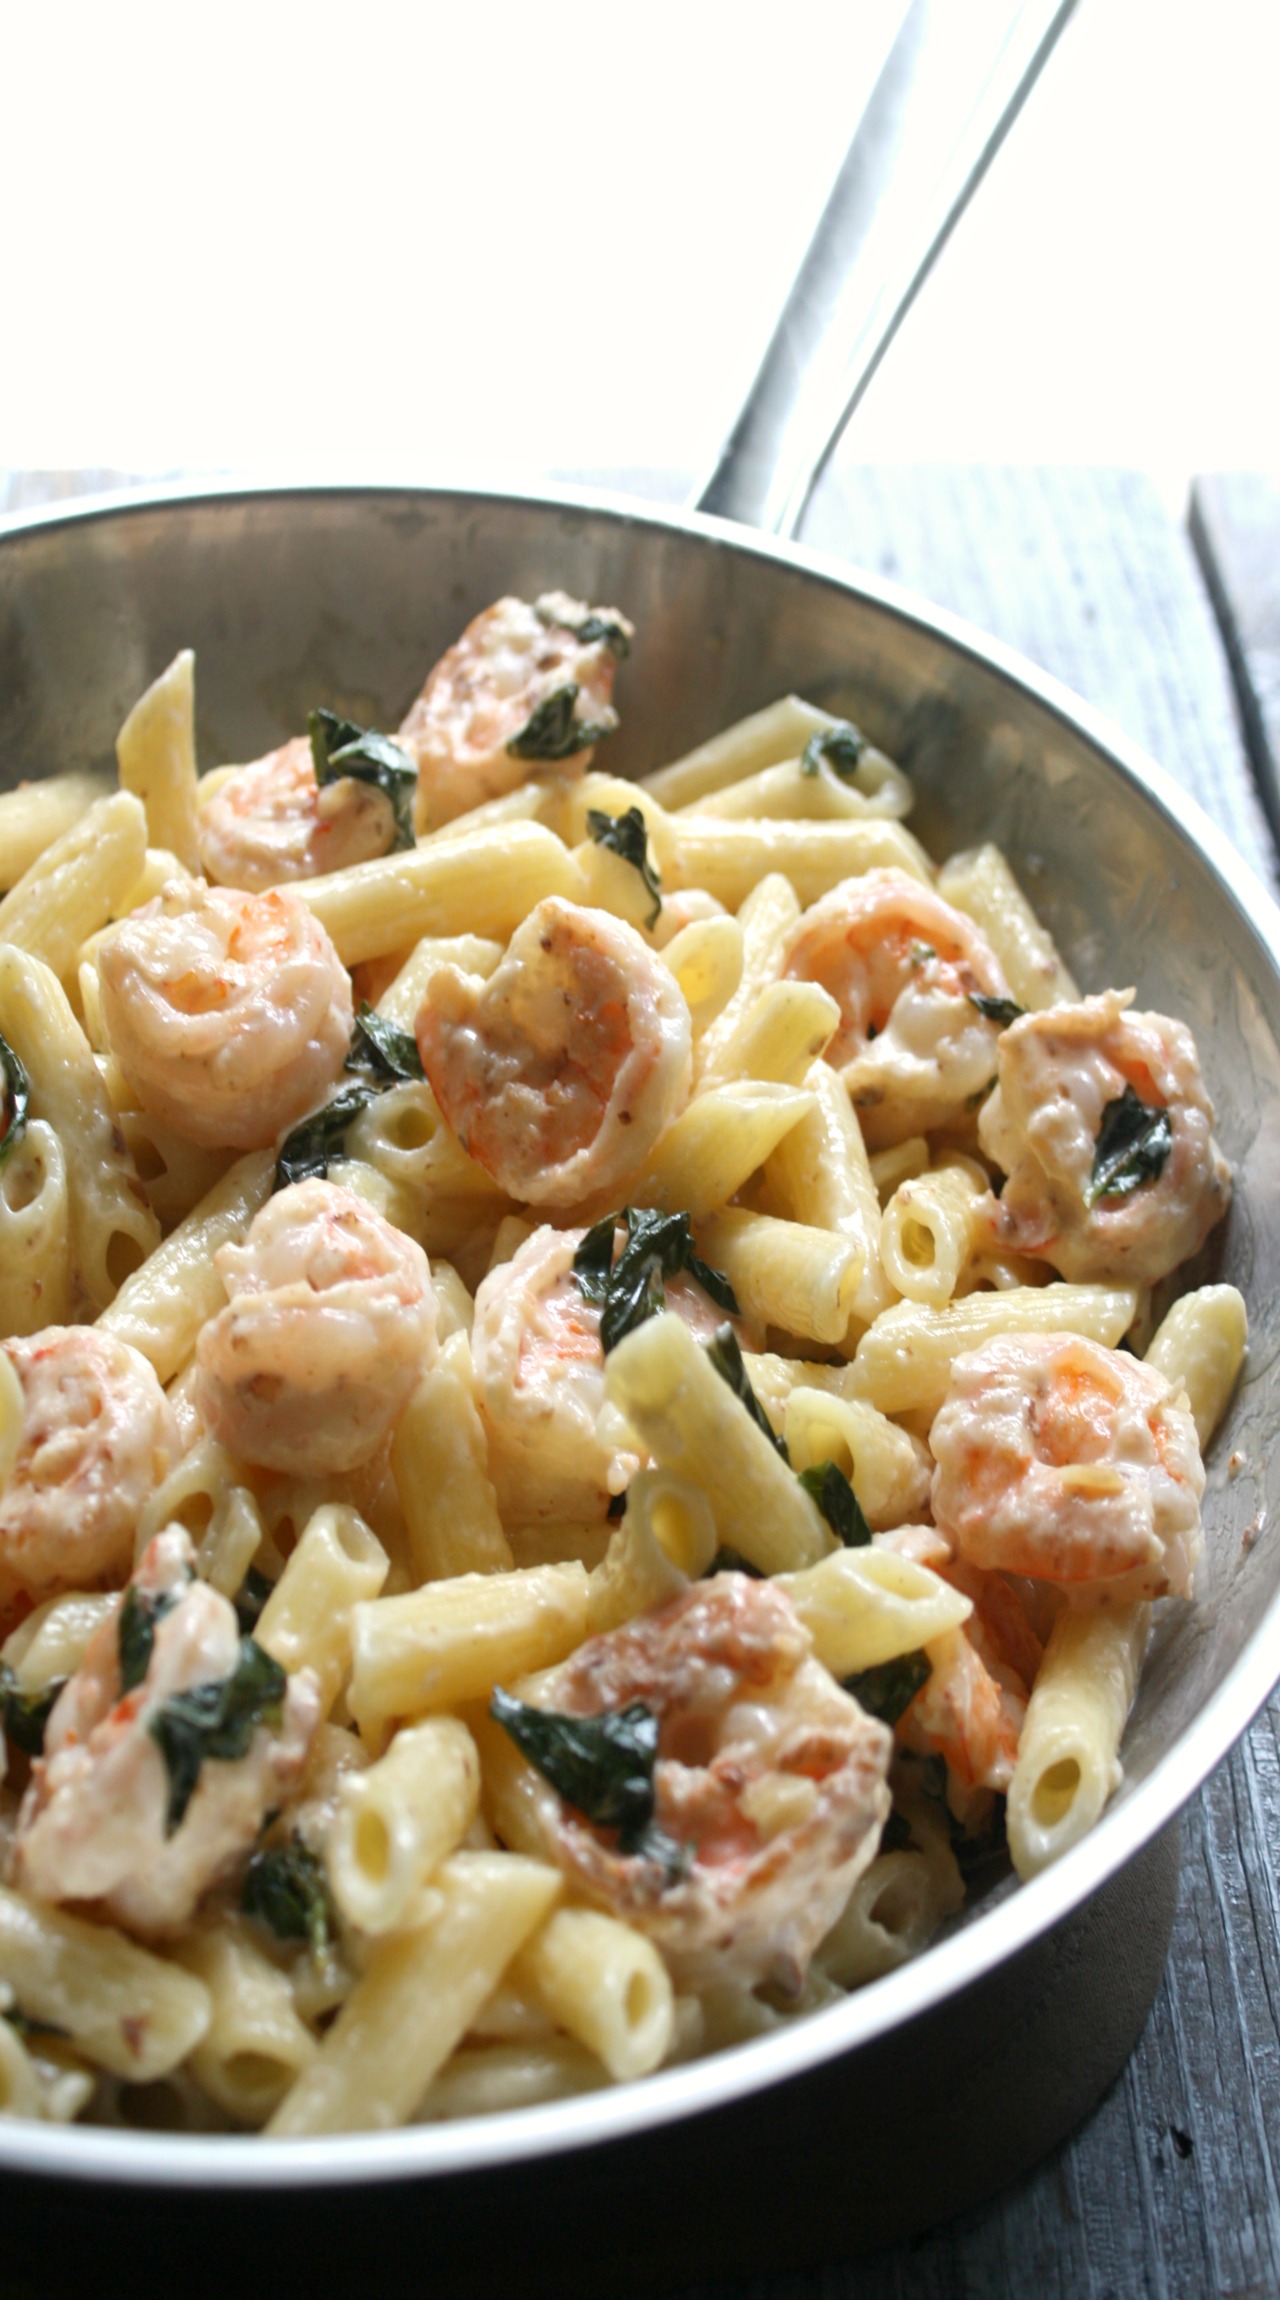 Creamy Lemon Basil Shrimp Pasta recipe. Buttery, garlicky shrimp tossed in a creamy basil wine sauce and pasta. This dinner for 2 is ready in 30 mins. 